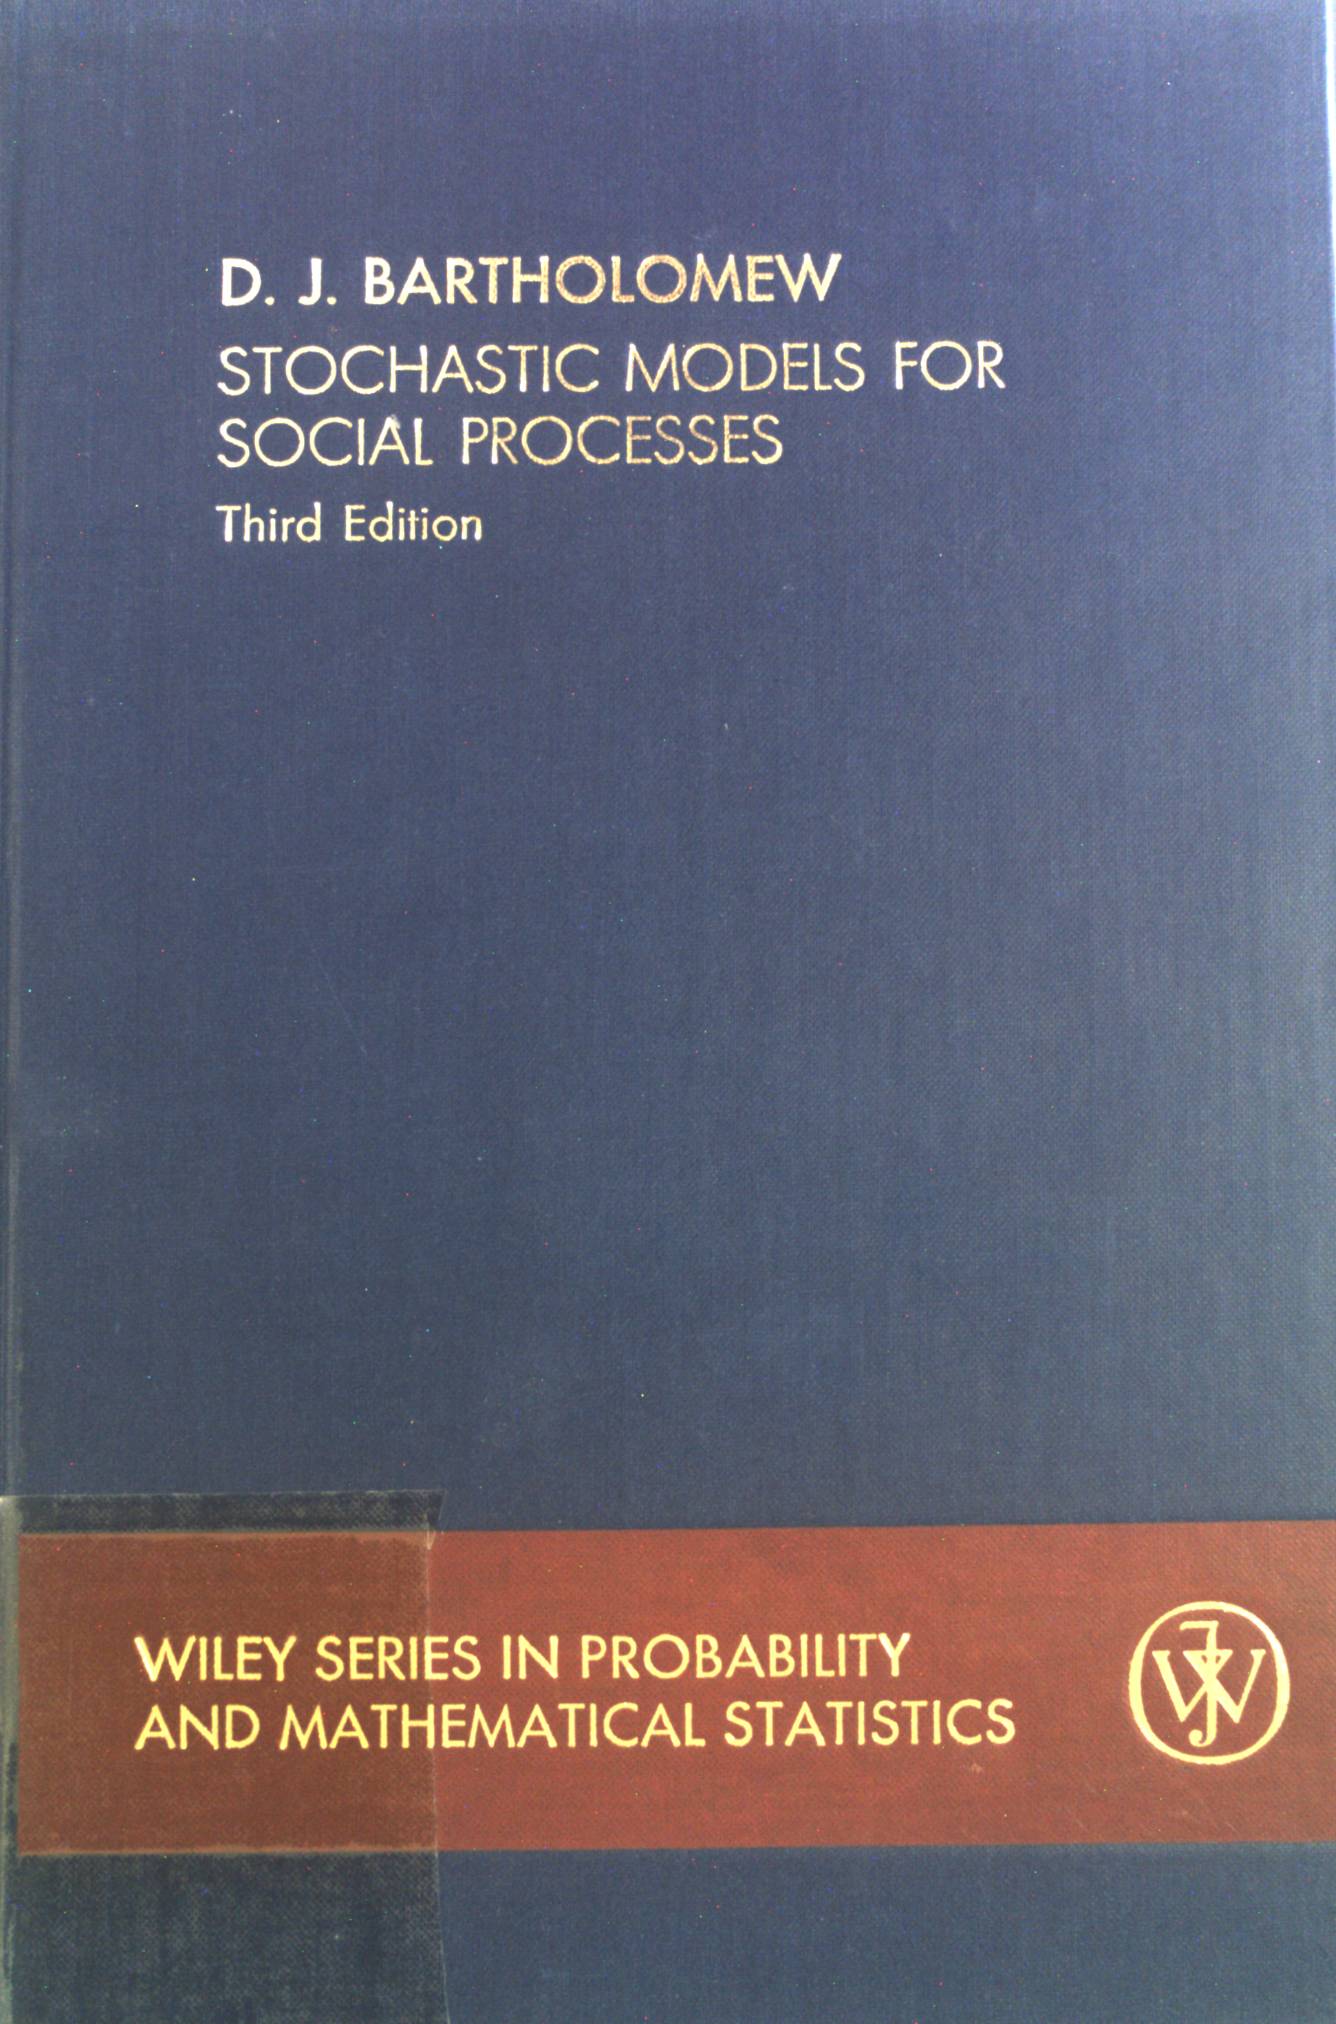 Stochastic Models for Social Processes. Wiley Series in Probability and Mathematical Statistics 3rd ed. - Bartholomew, D.J.